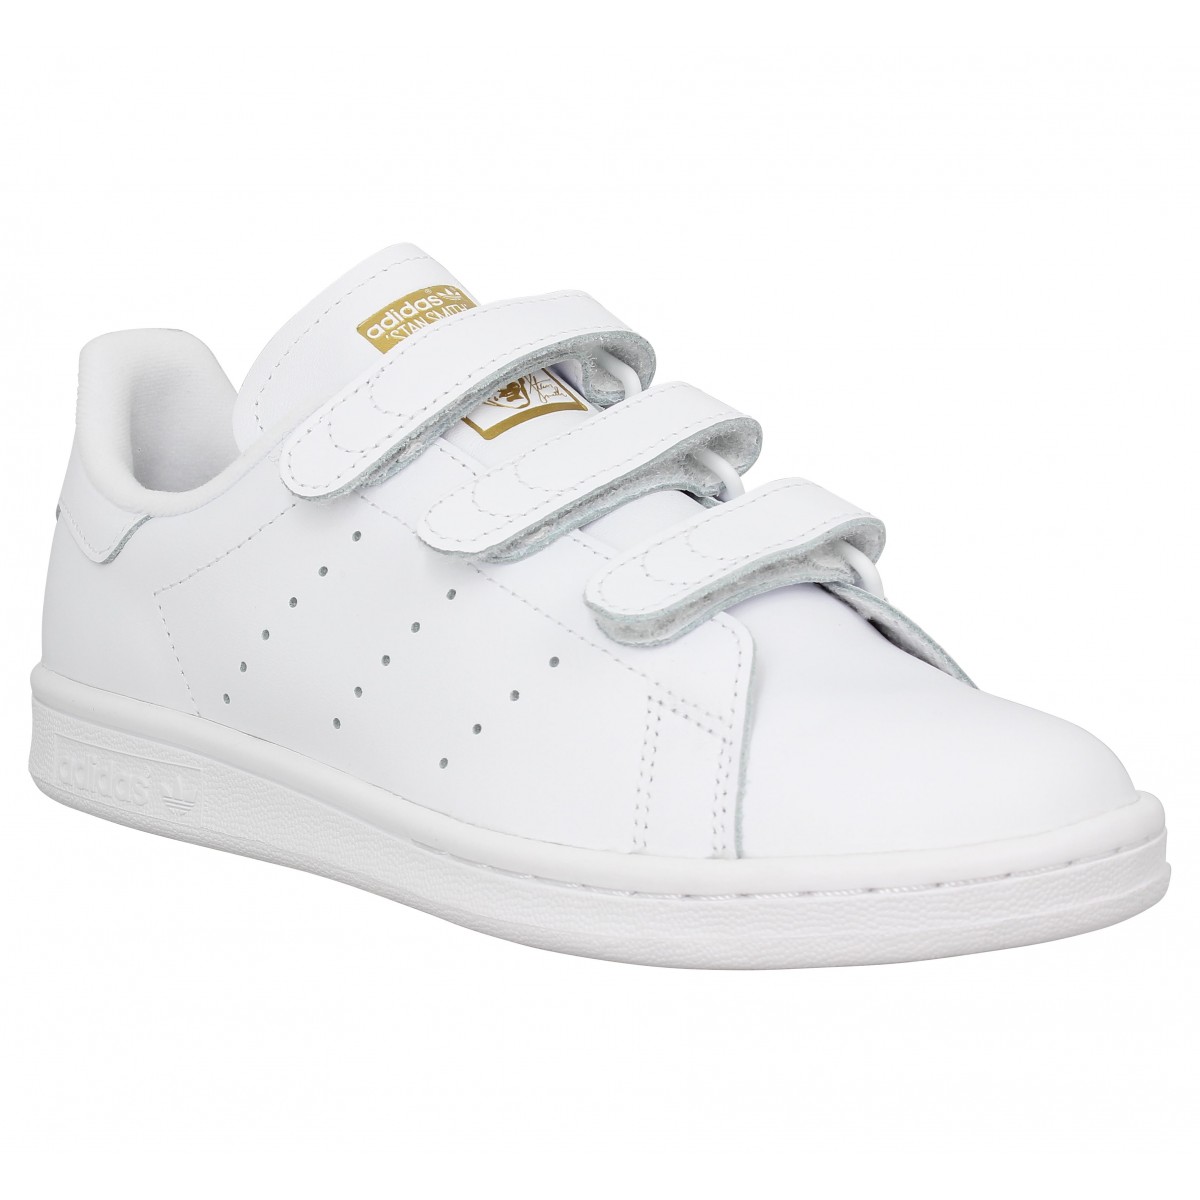 stan smith scratch rouge femme